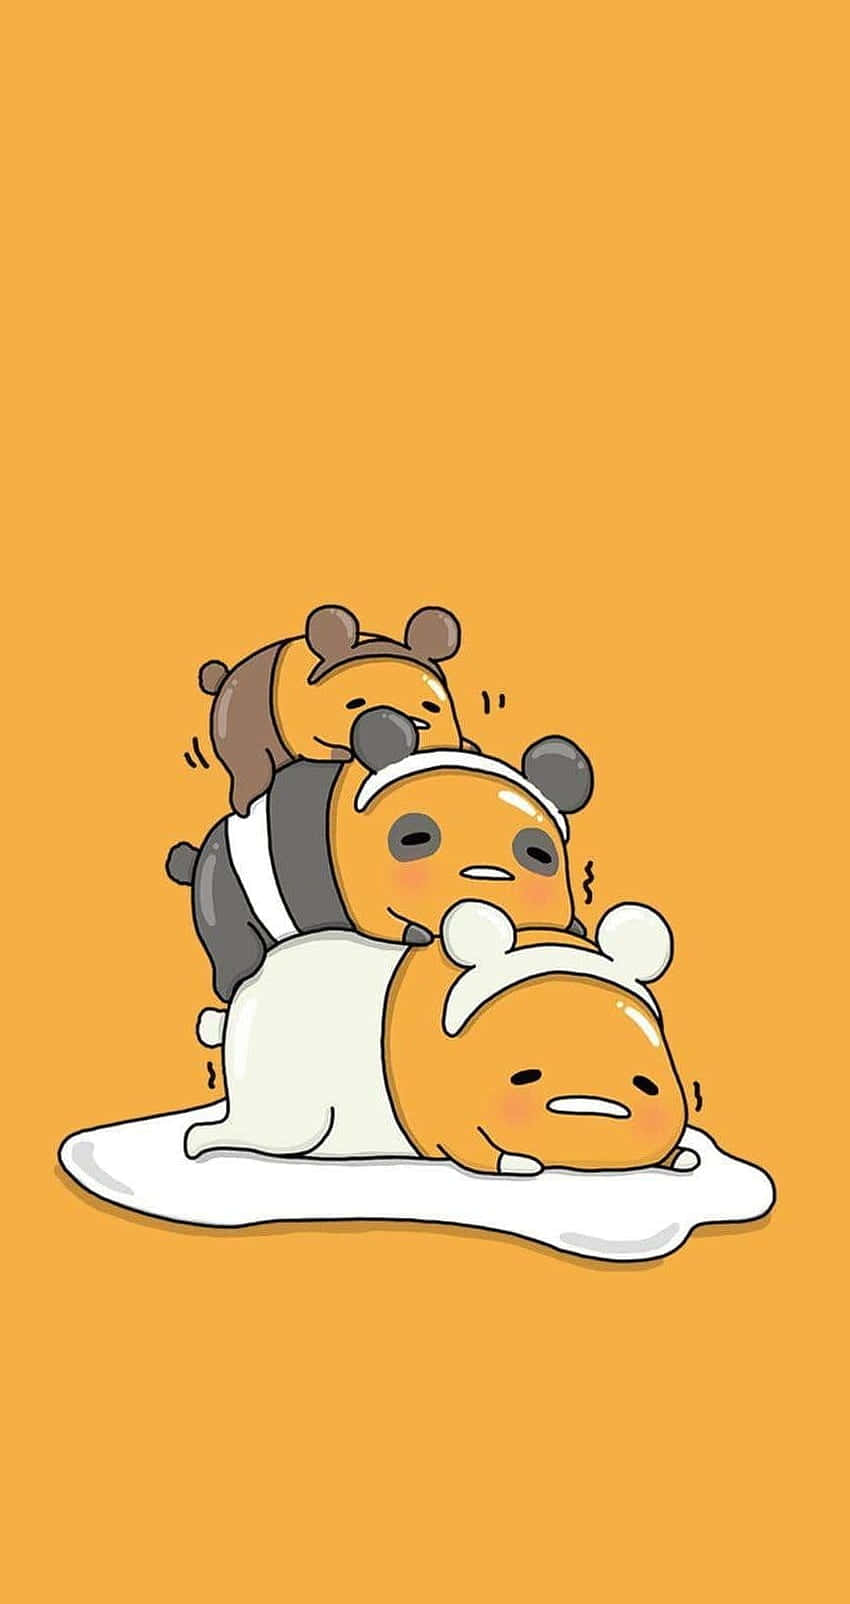 "Stay connected with Gudetama and your loved ones!" Wallpaper